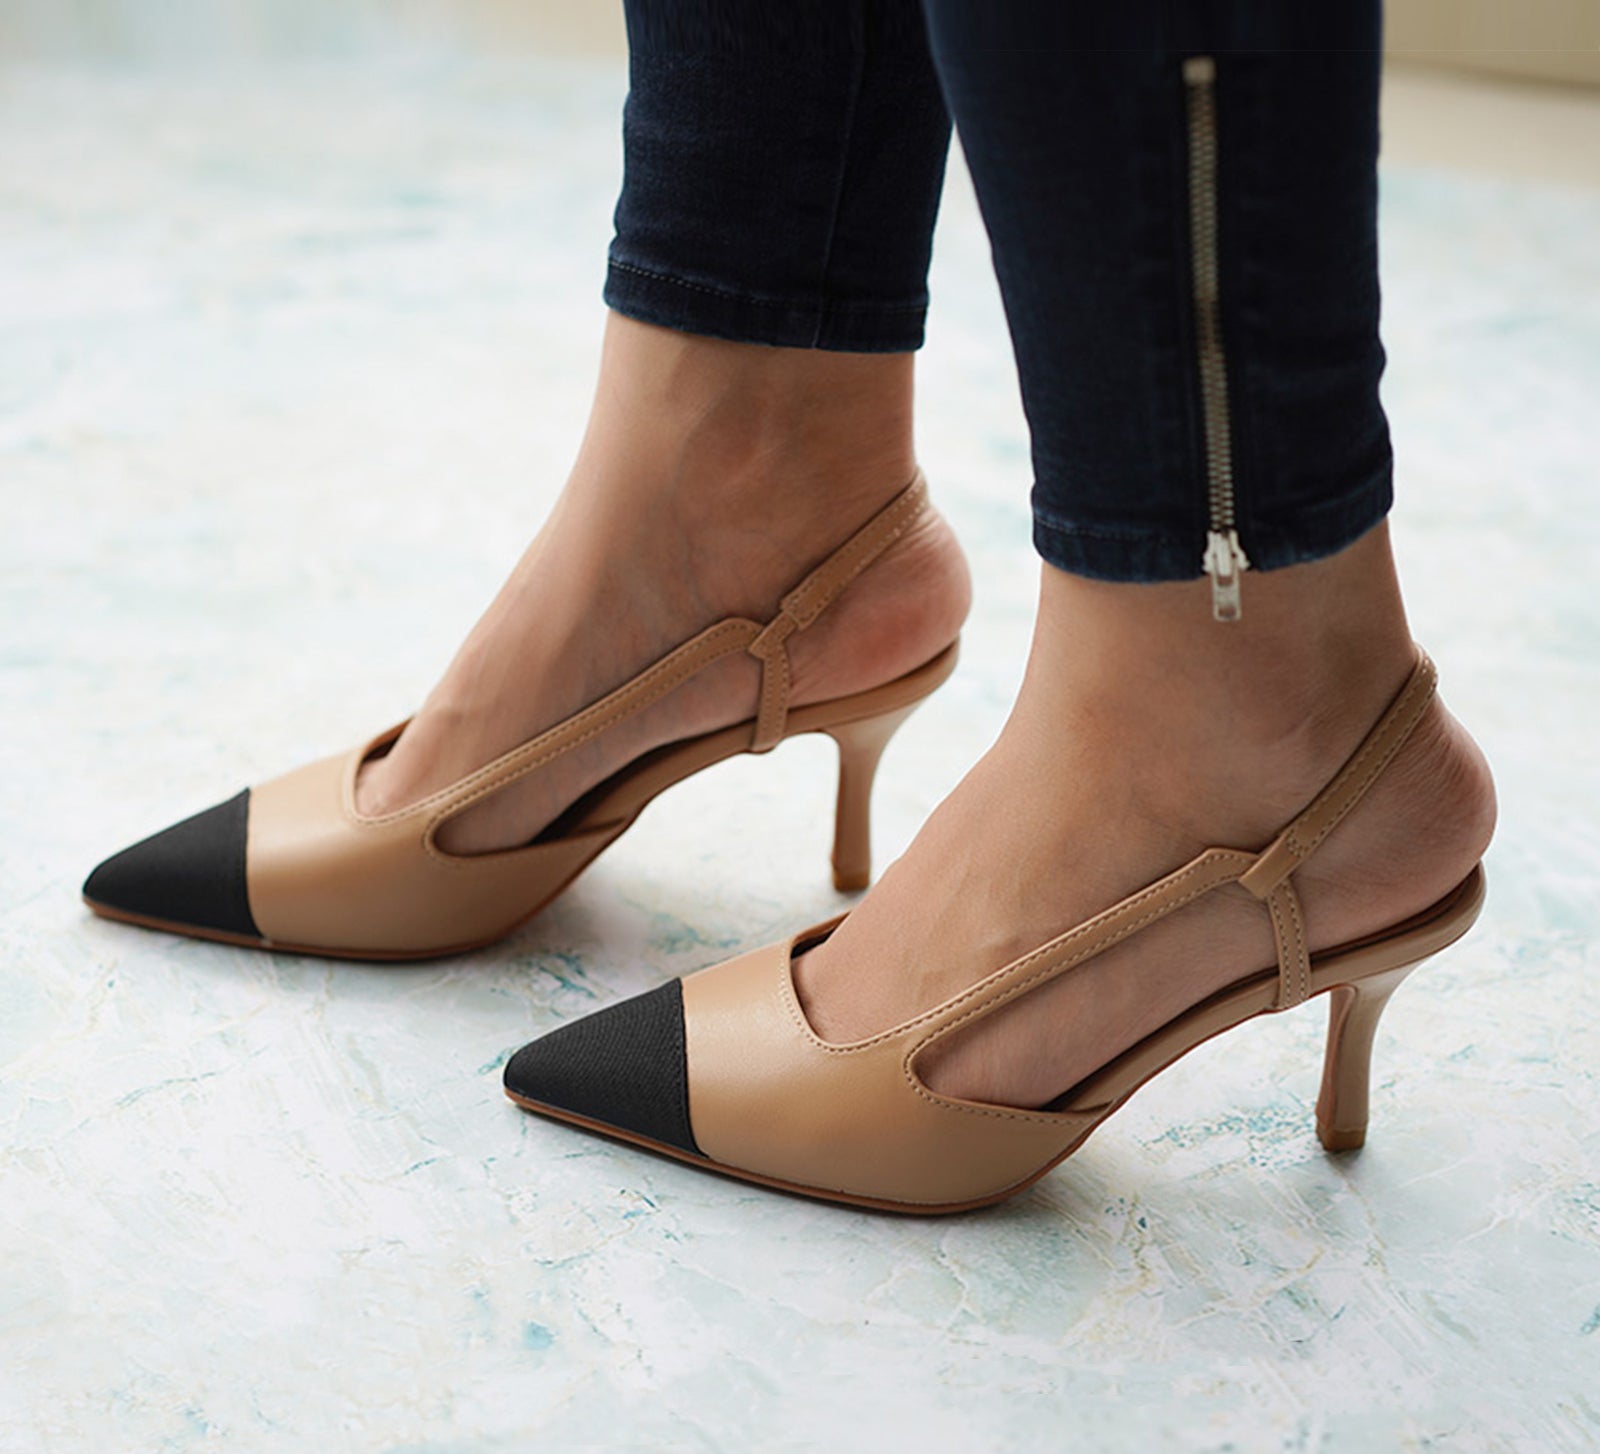 Beige Pointed Toe Slingback Pumps, a versatile and sophisticated choice for understated and timeless style